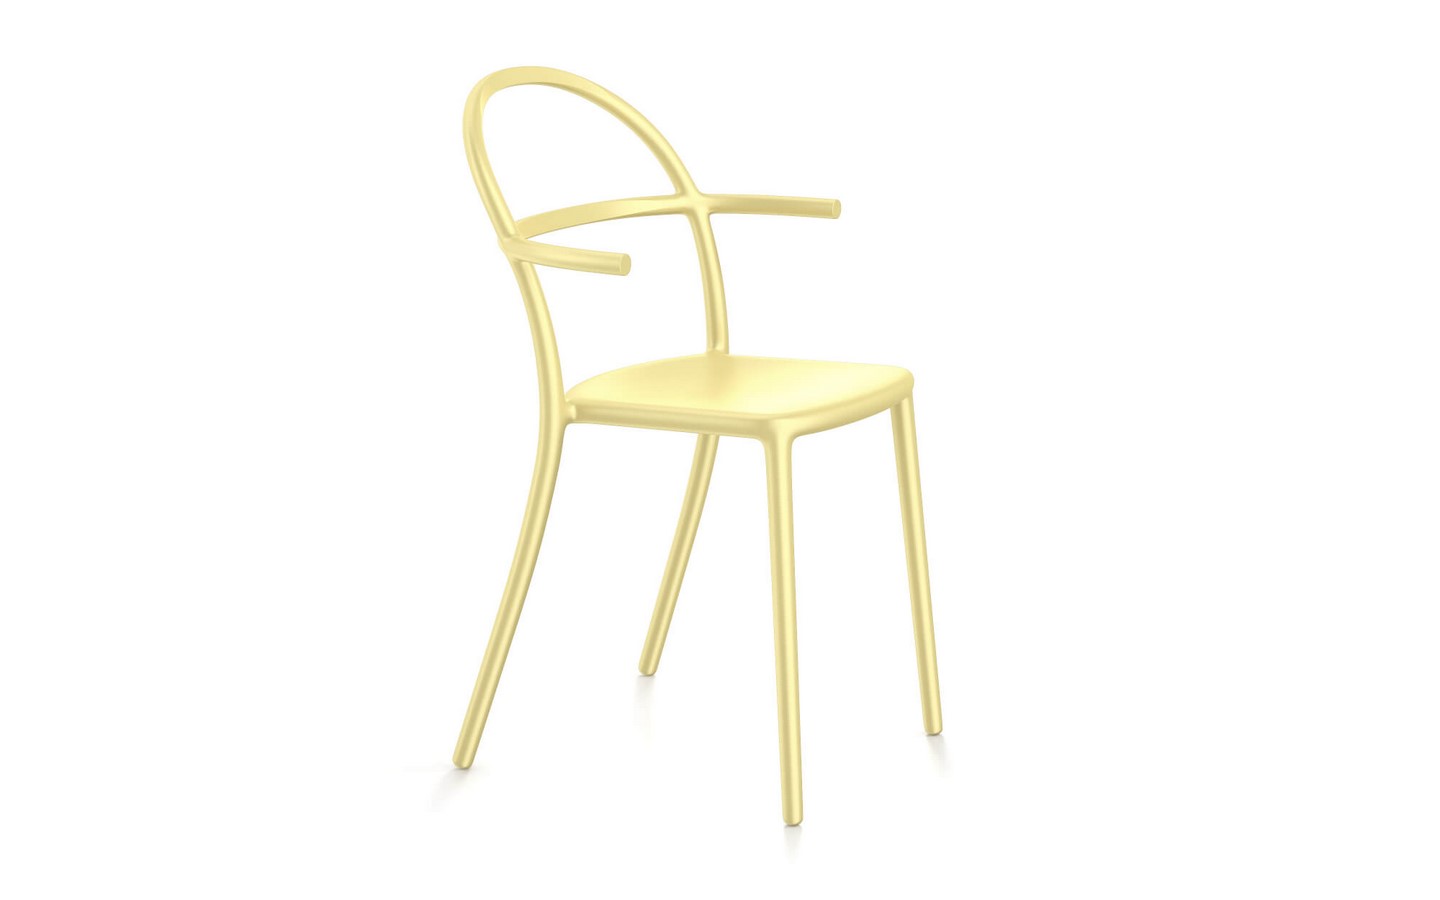 GENERIC.C, was designed by Philippe Starck with A. Maggiar for Kartell - Sheet3